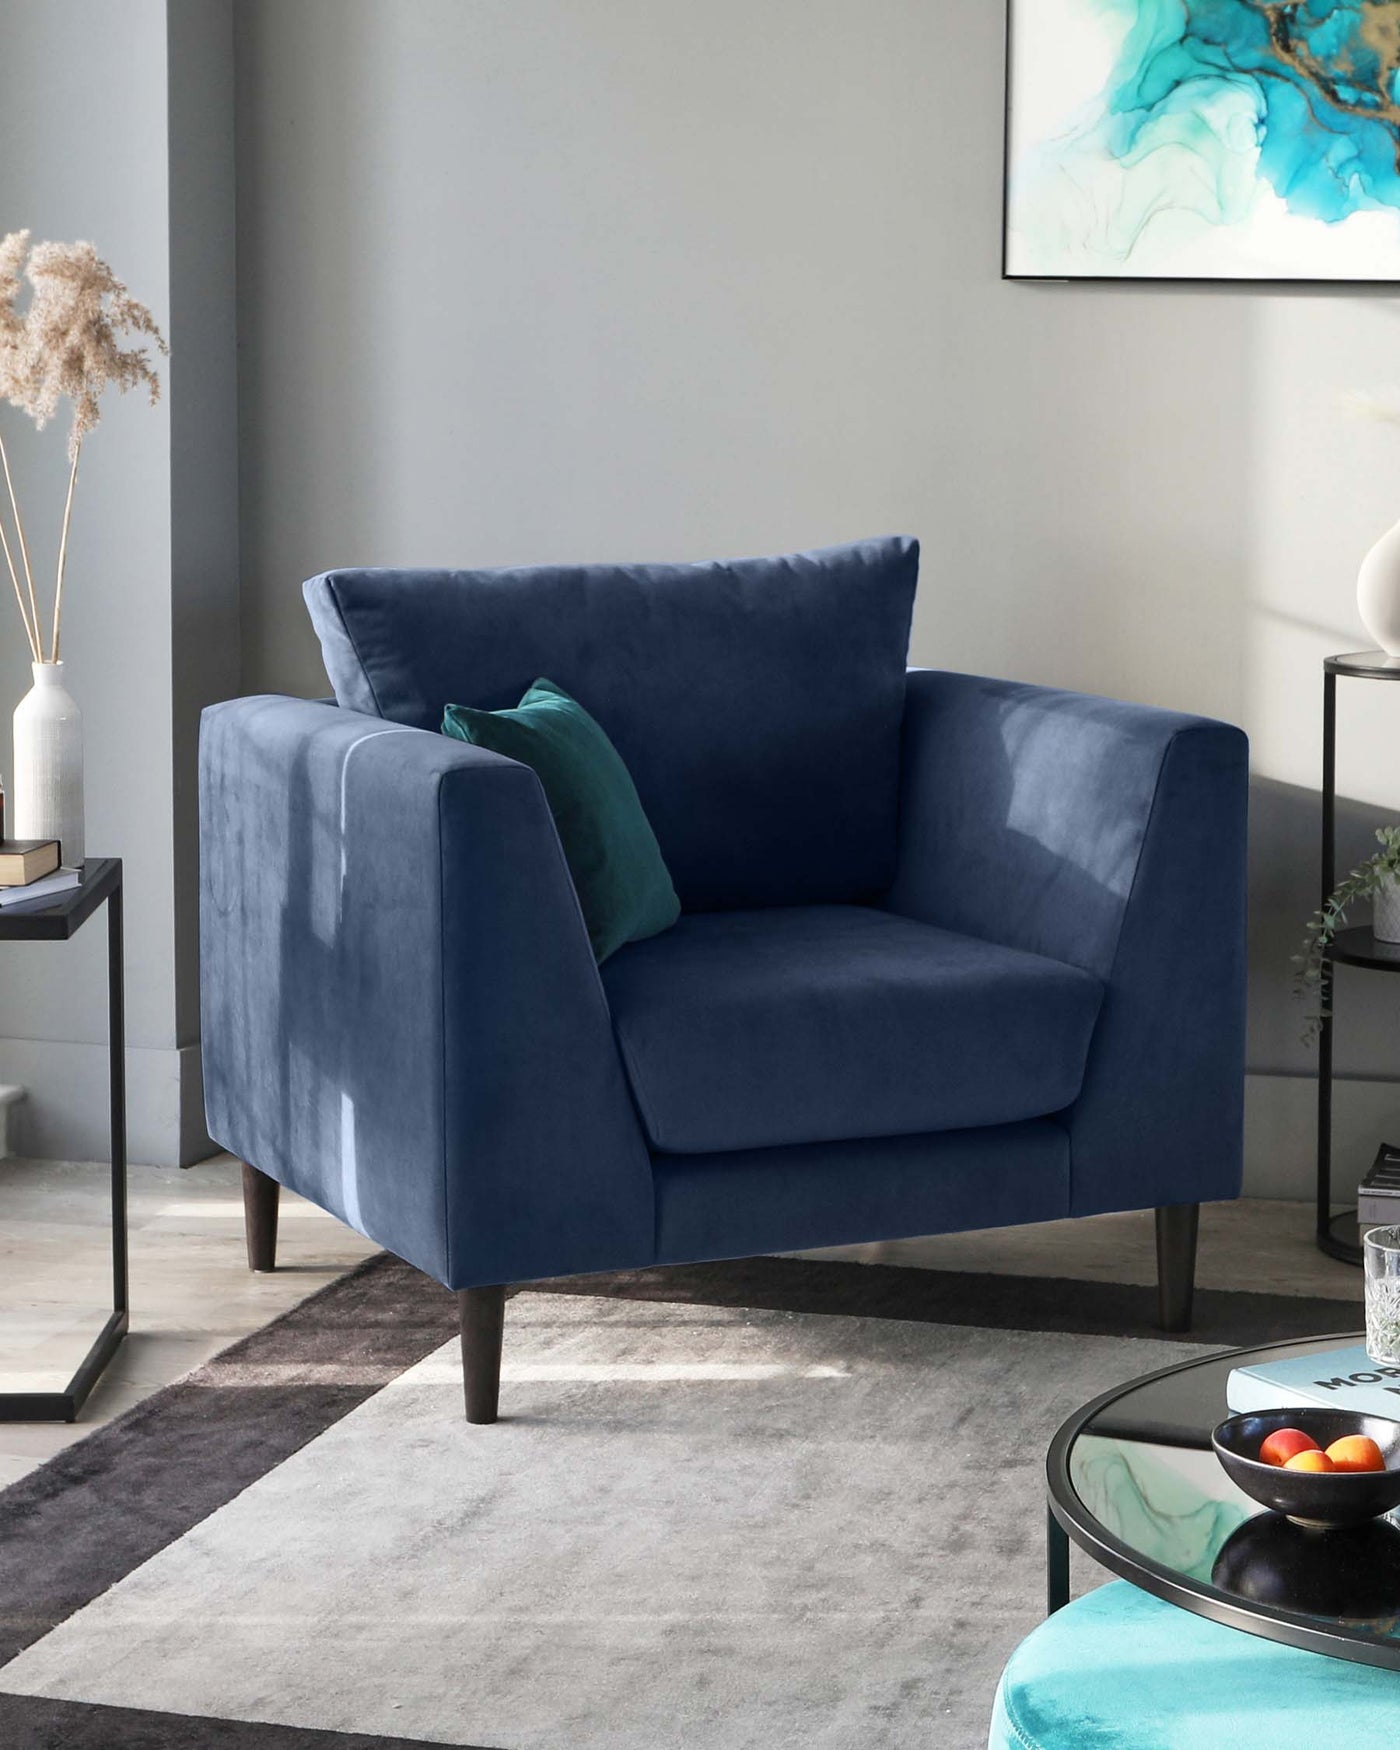 A contemporary navy blue velvet armchair with a clean, square design, featuring plush cushions and dark wooden legs. The chair is accented with a teal throw pillow and is positioned on a two-tone grey area rug. In the background, there's a small side table with a vase and dried pampas grass, adjacent to a glass-topped coffee table with a bowl of fruit. The room is well-lit, and there's a large abstract painting with blue and green hues on the wall.